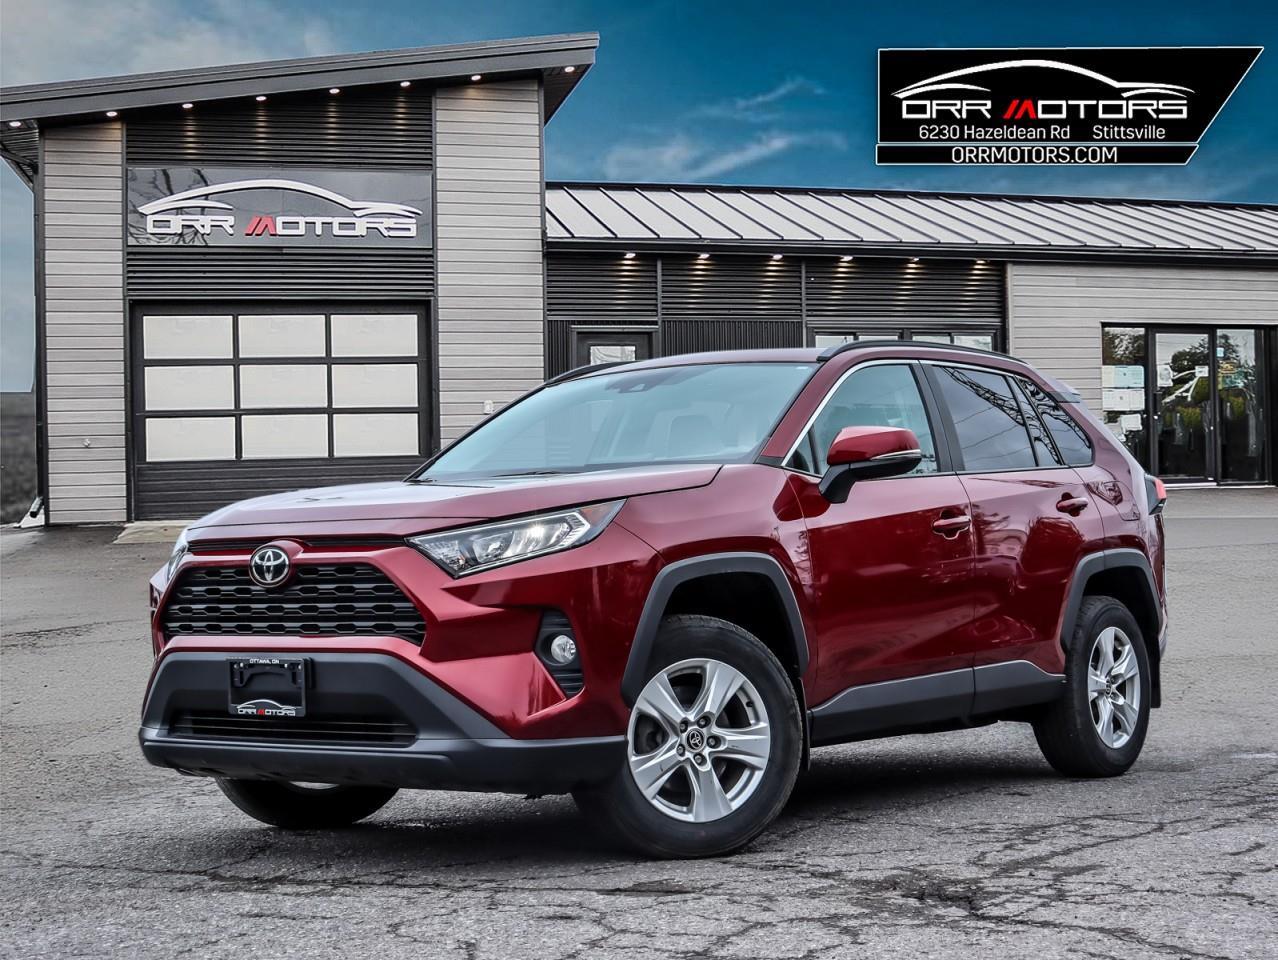 2021 Toyota RAV4 XLE **AVAILABLE NOW! - CALL NOW TO RESERVE**